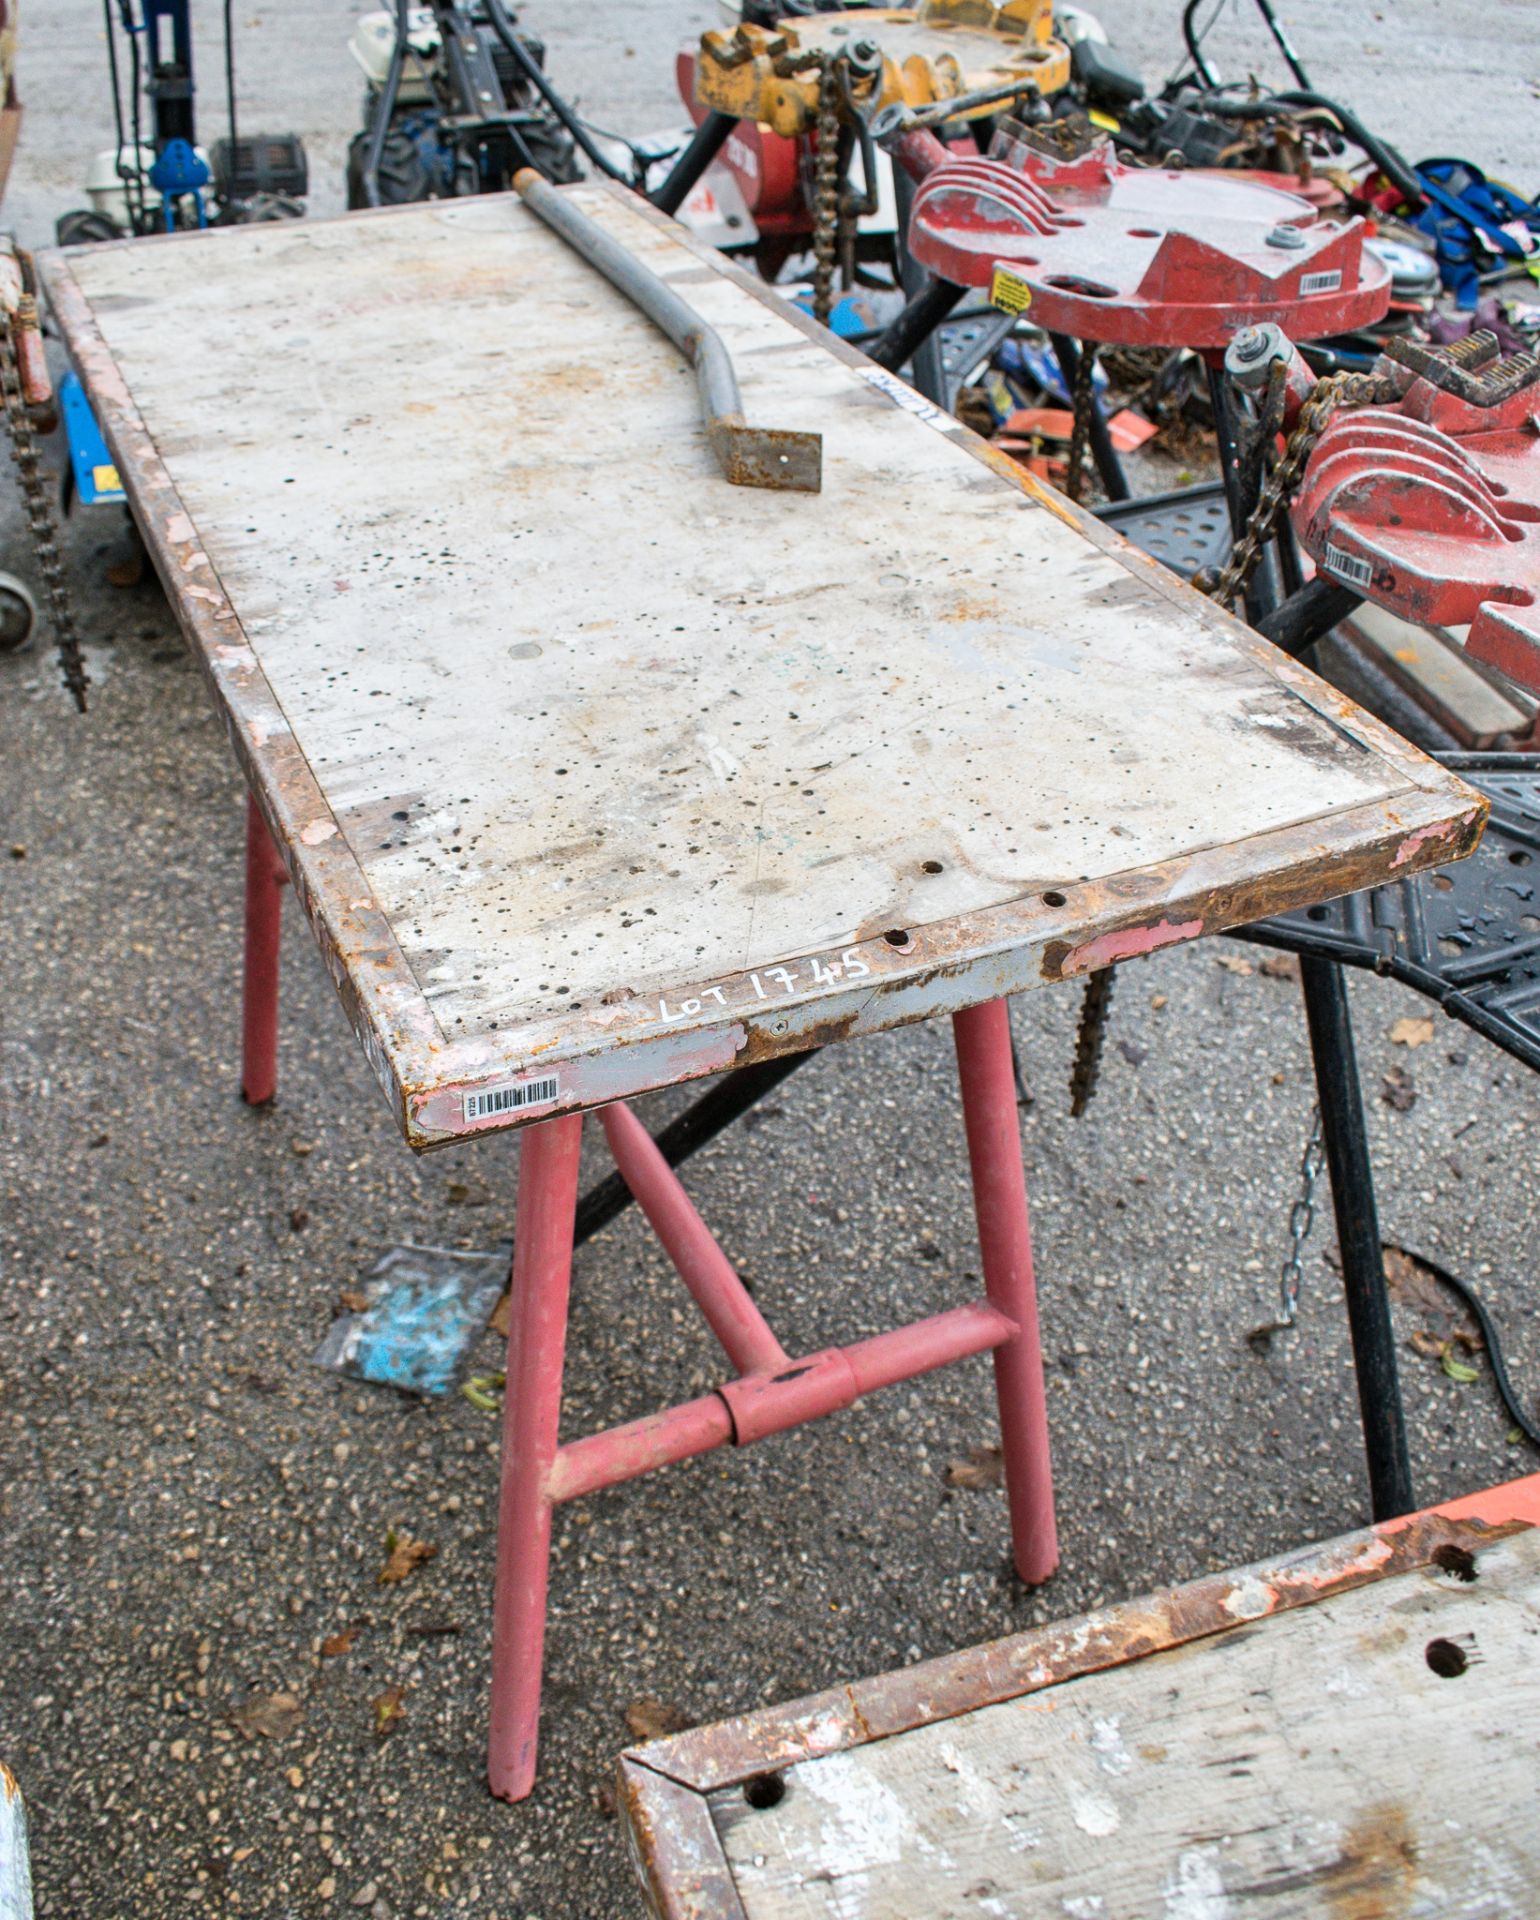 Collapsible site work bench